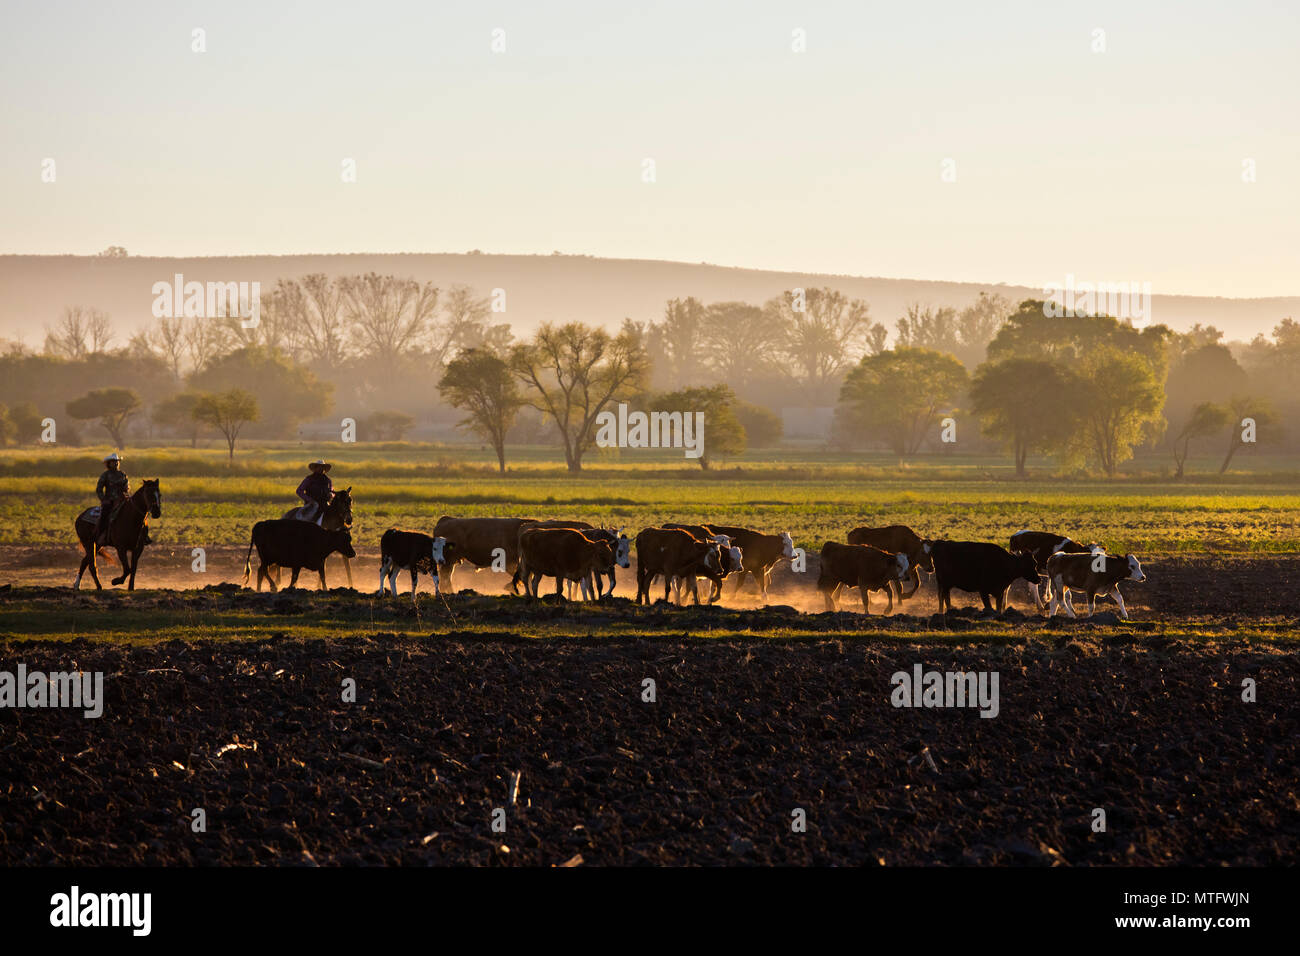 MEXICAN CABALLEROS herd cattle at day break - SAN MIGUEL DE ALLENDE, MEXICO Stock Photo